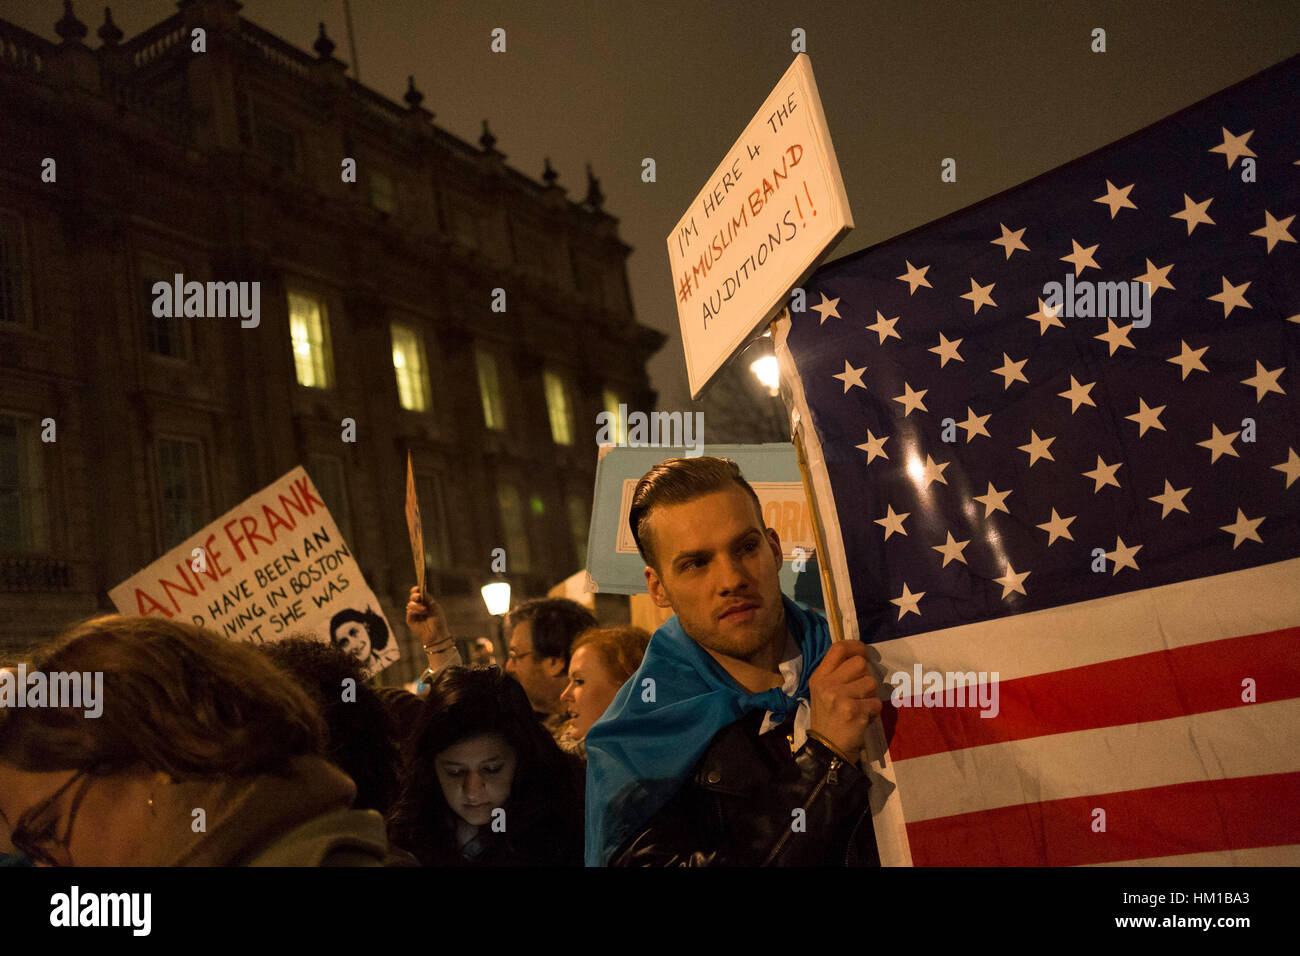 London, UK. 30th January, 2017. Demonstrators protest outside Downing Street against US President Donald Trump's ban on Muslims entering the US. The protesters also opposed British PM Theresa May's invitation to Trump for a state visit to the UK. Credit: Mike Abrahams/Alamy Live News Stock Photo